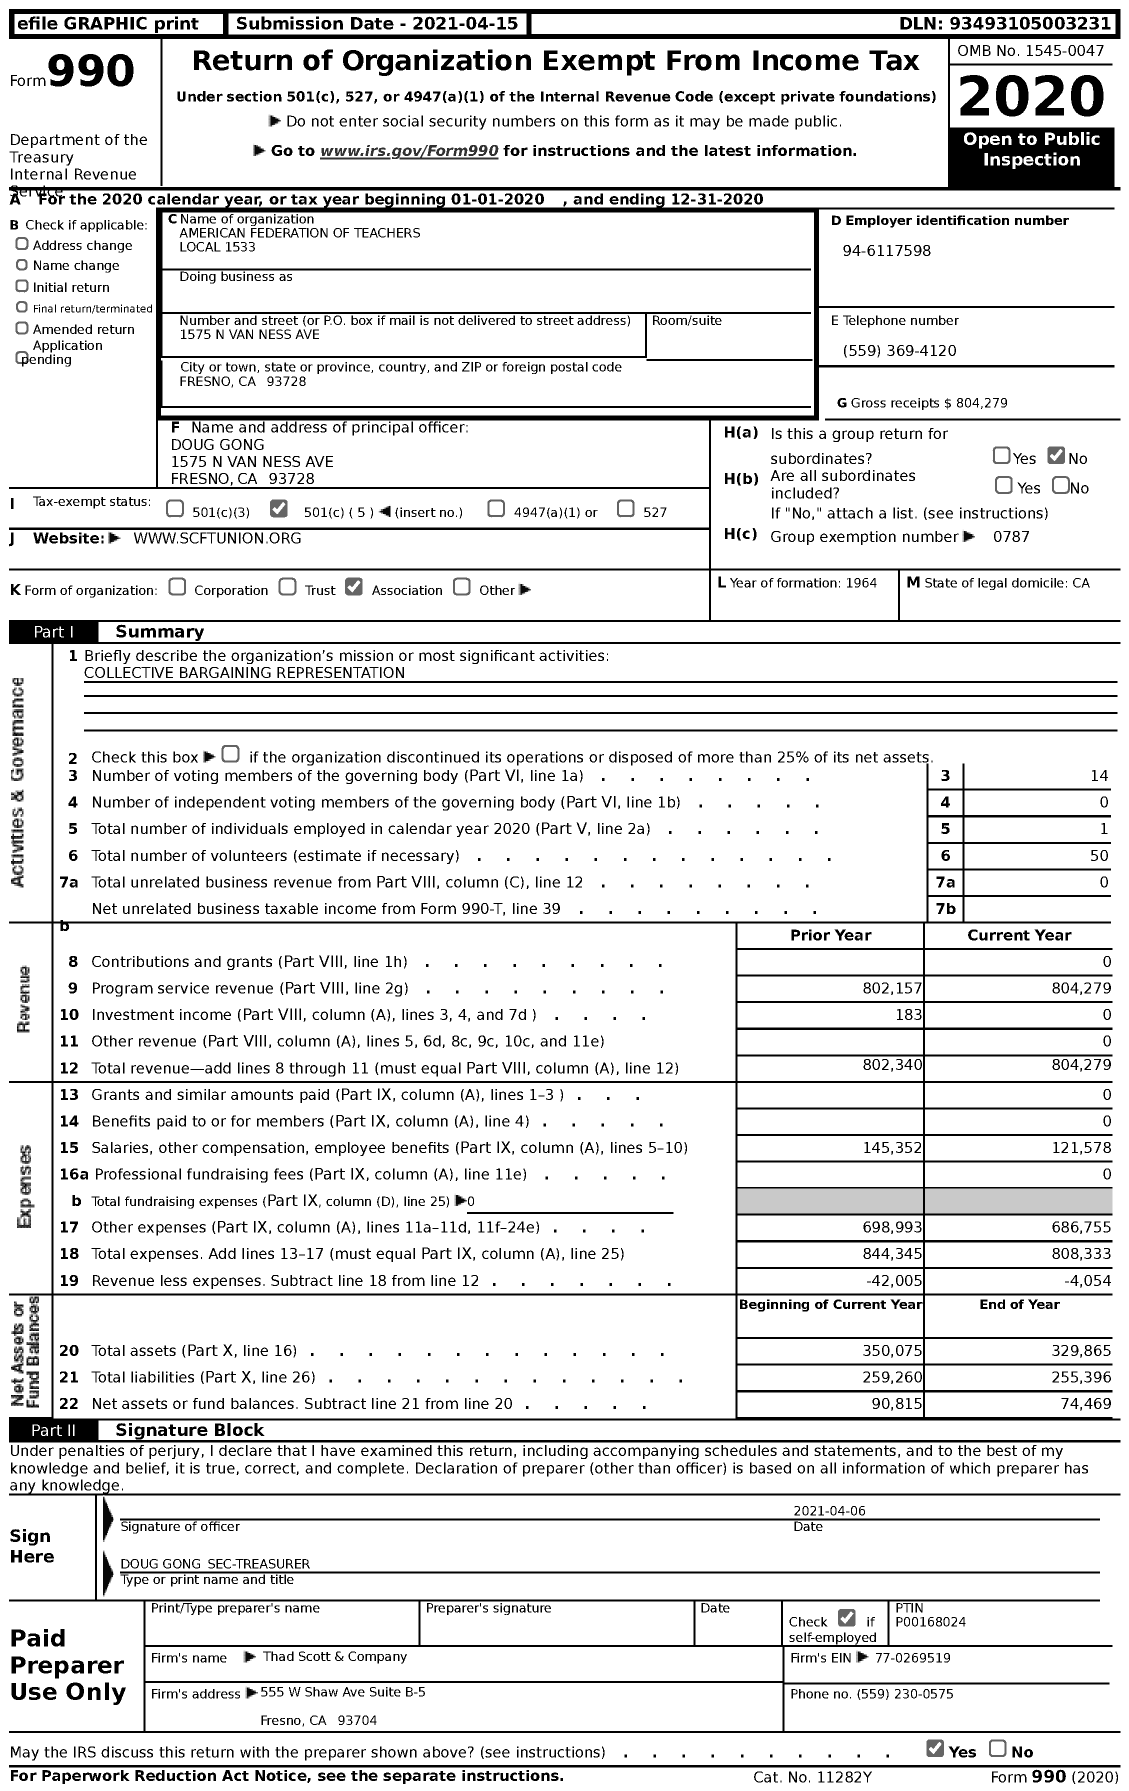 Image of first page of 2020 Form 990 for American Federation of Teachers - 1533 State Center